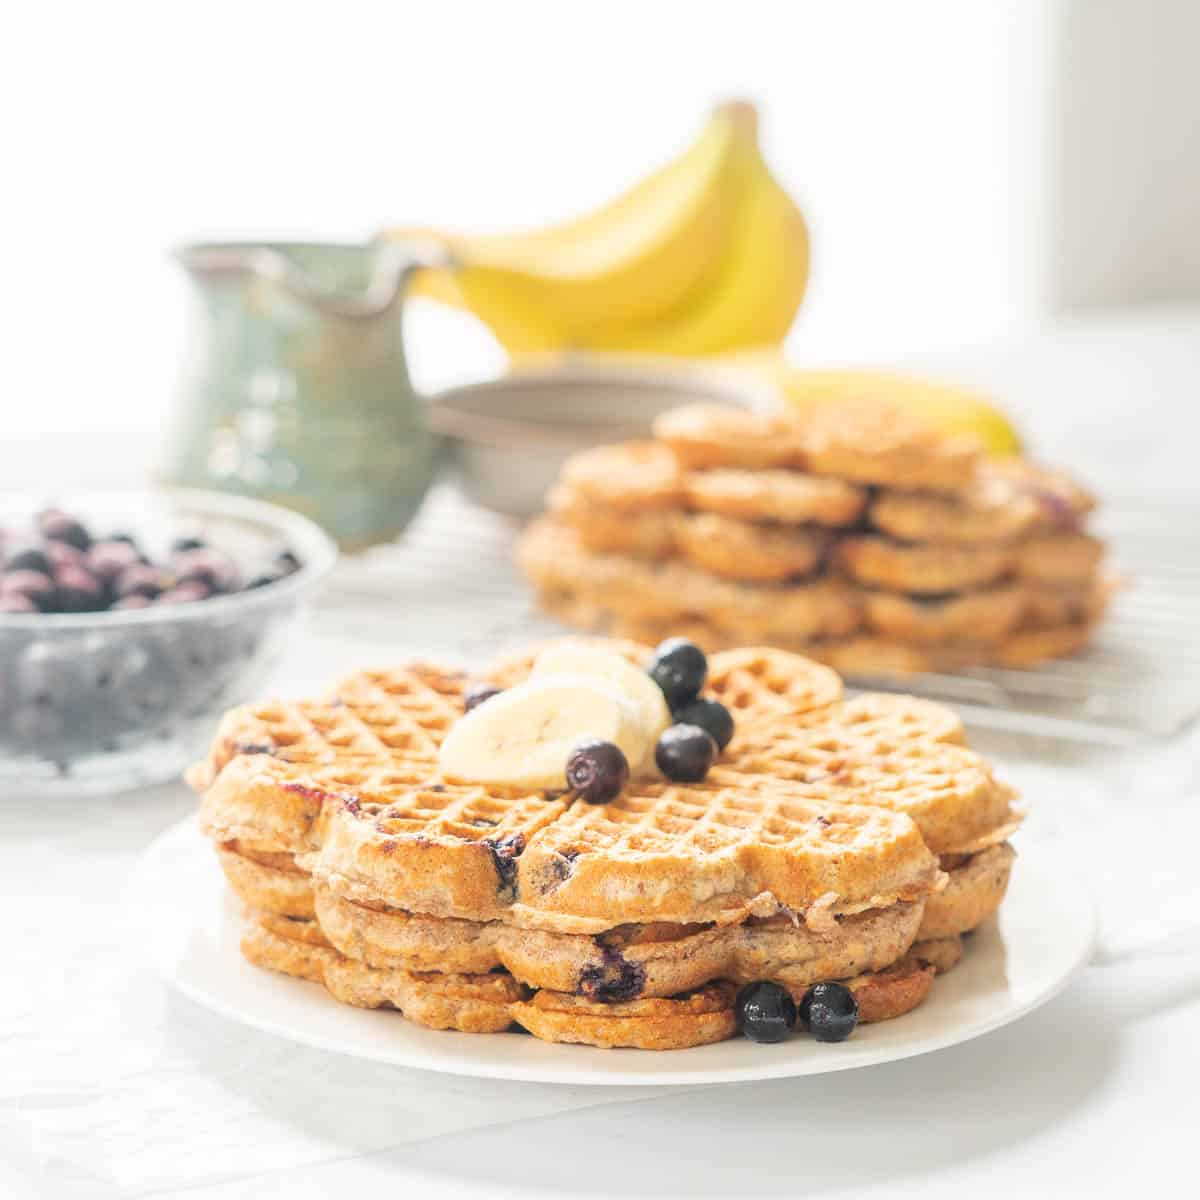 A stack of three waffles topped with banana slices and blueberries, a jug if maple syrup in the background.